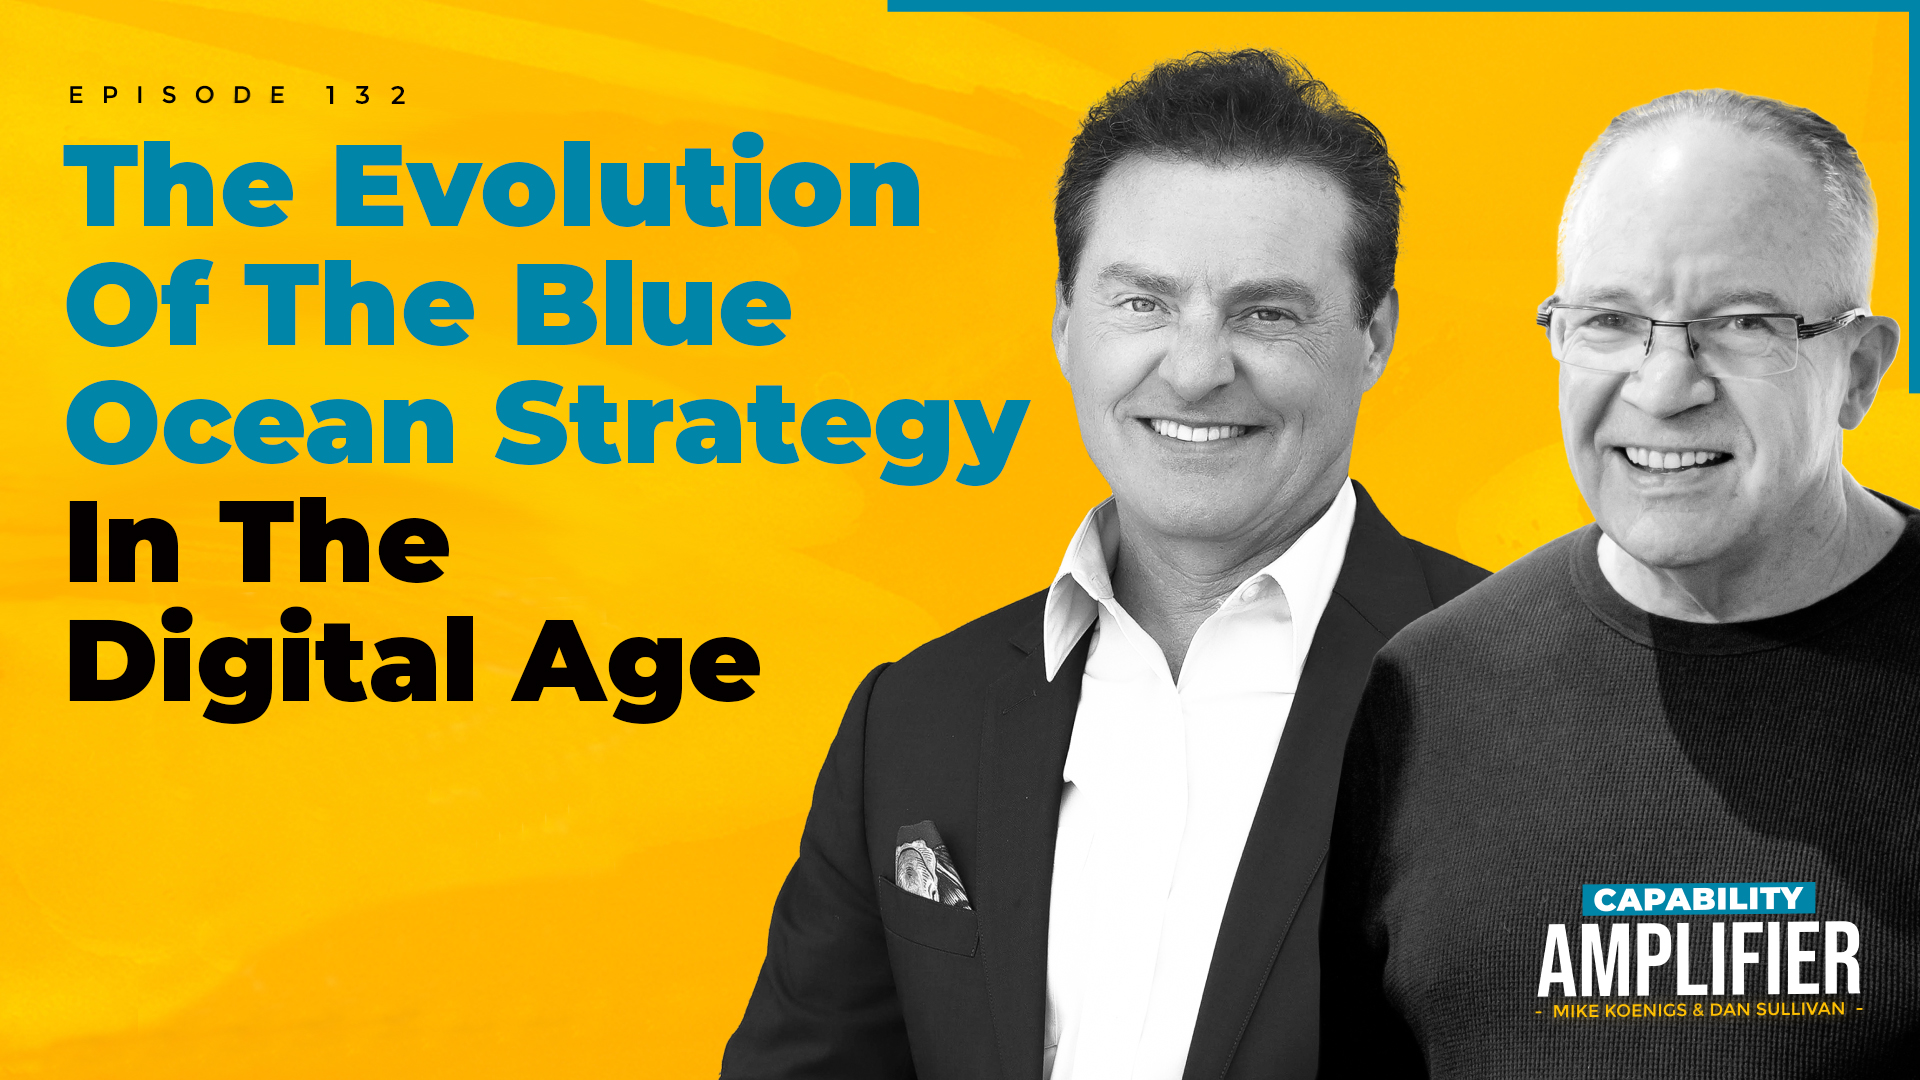 Episode 132 Art: Text reading "The Evolution of the Blue Ocean Strategy in the Digital Age" on a yellow background with photos of Mike Koenigs and Dan Sullivan.